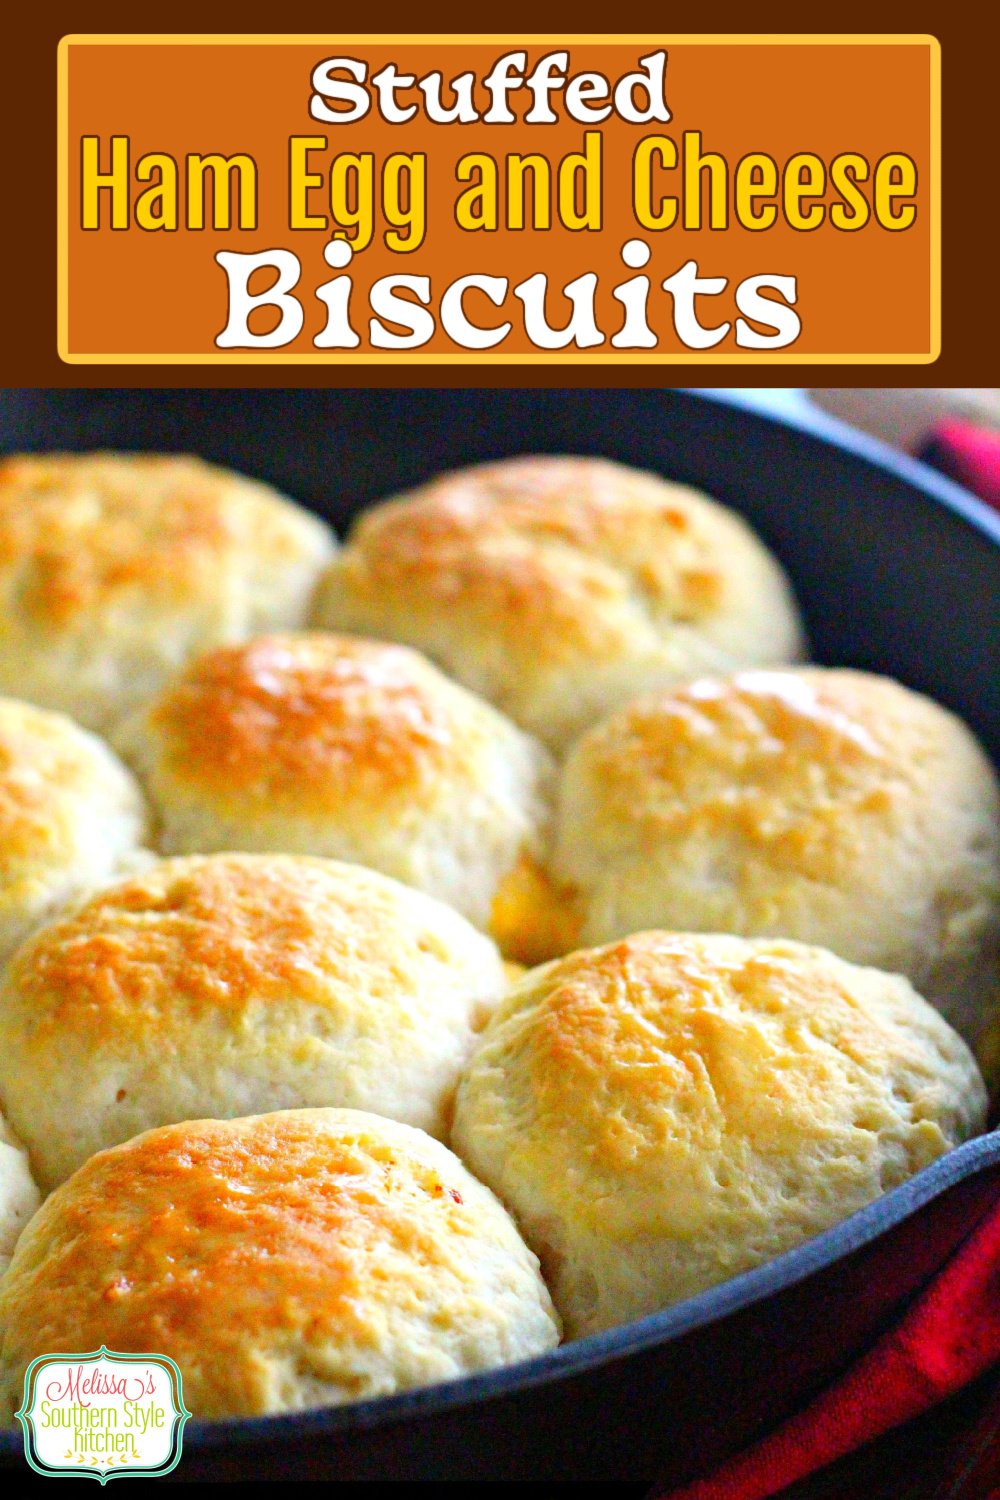 These made-from-scratch biscuits have a surprise hidden inside #stuffedbiscuits #southernbiscuits #buttermilkbiscuits #ham #eggs #brunch #breakfast #southernfood #southernrecipes #biscuits #holidaybrunch via @melissasssk